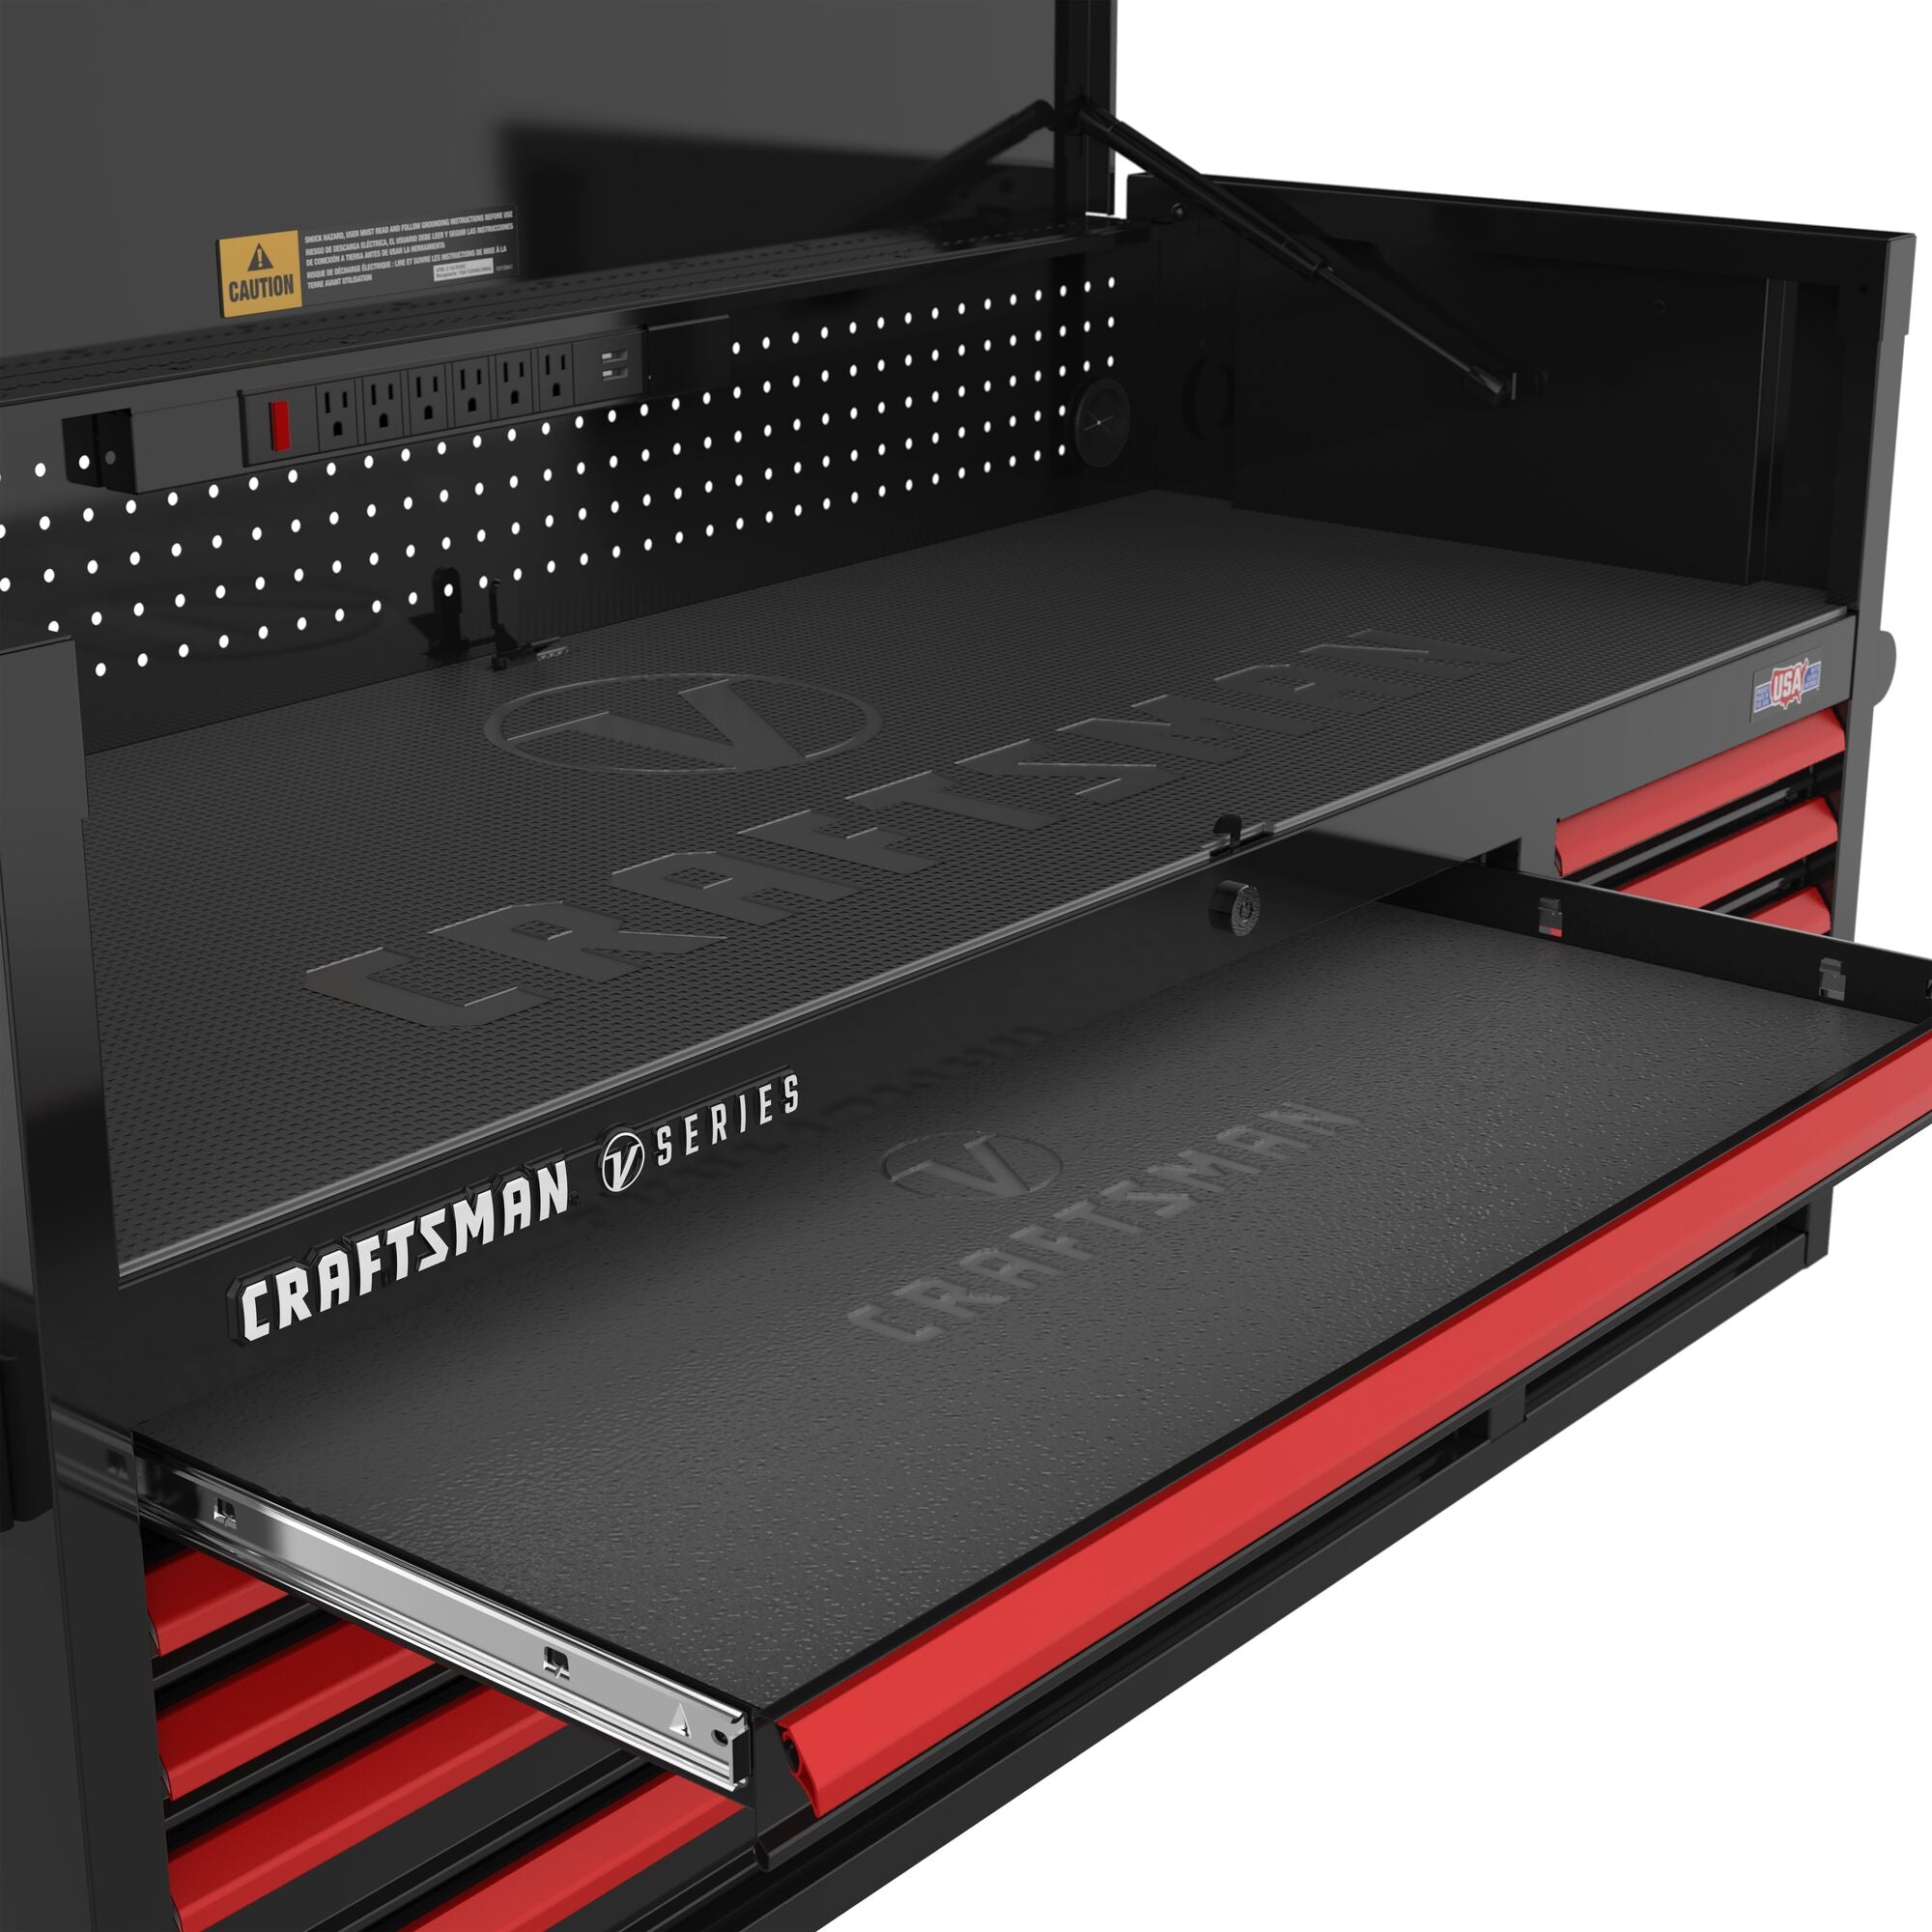 CRAFTSMAN V-Series™ 52 inch chest with drawer liner feature highlight